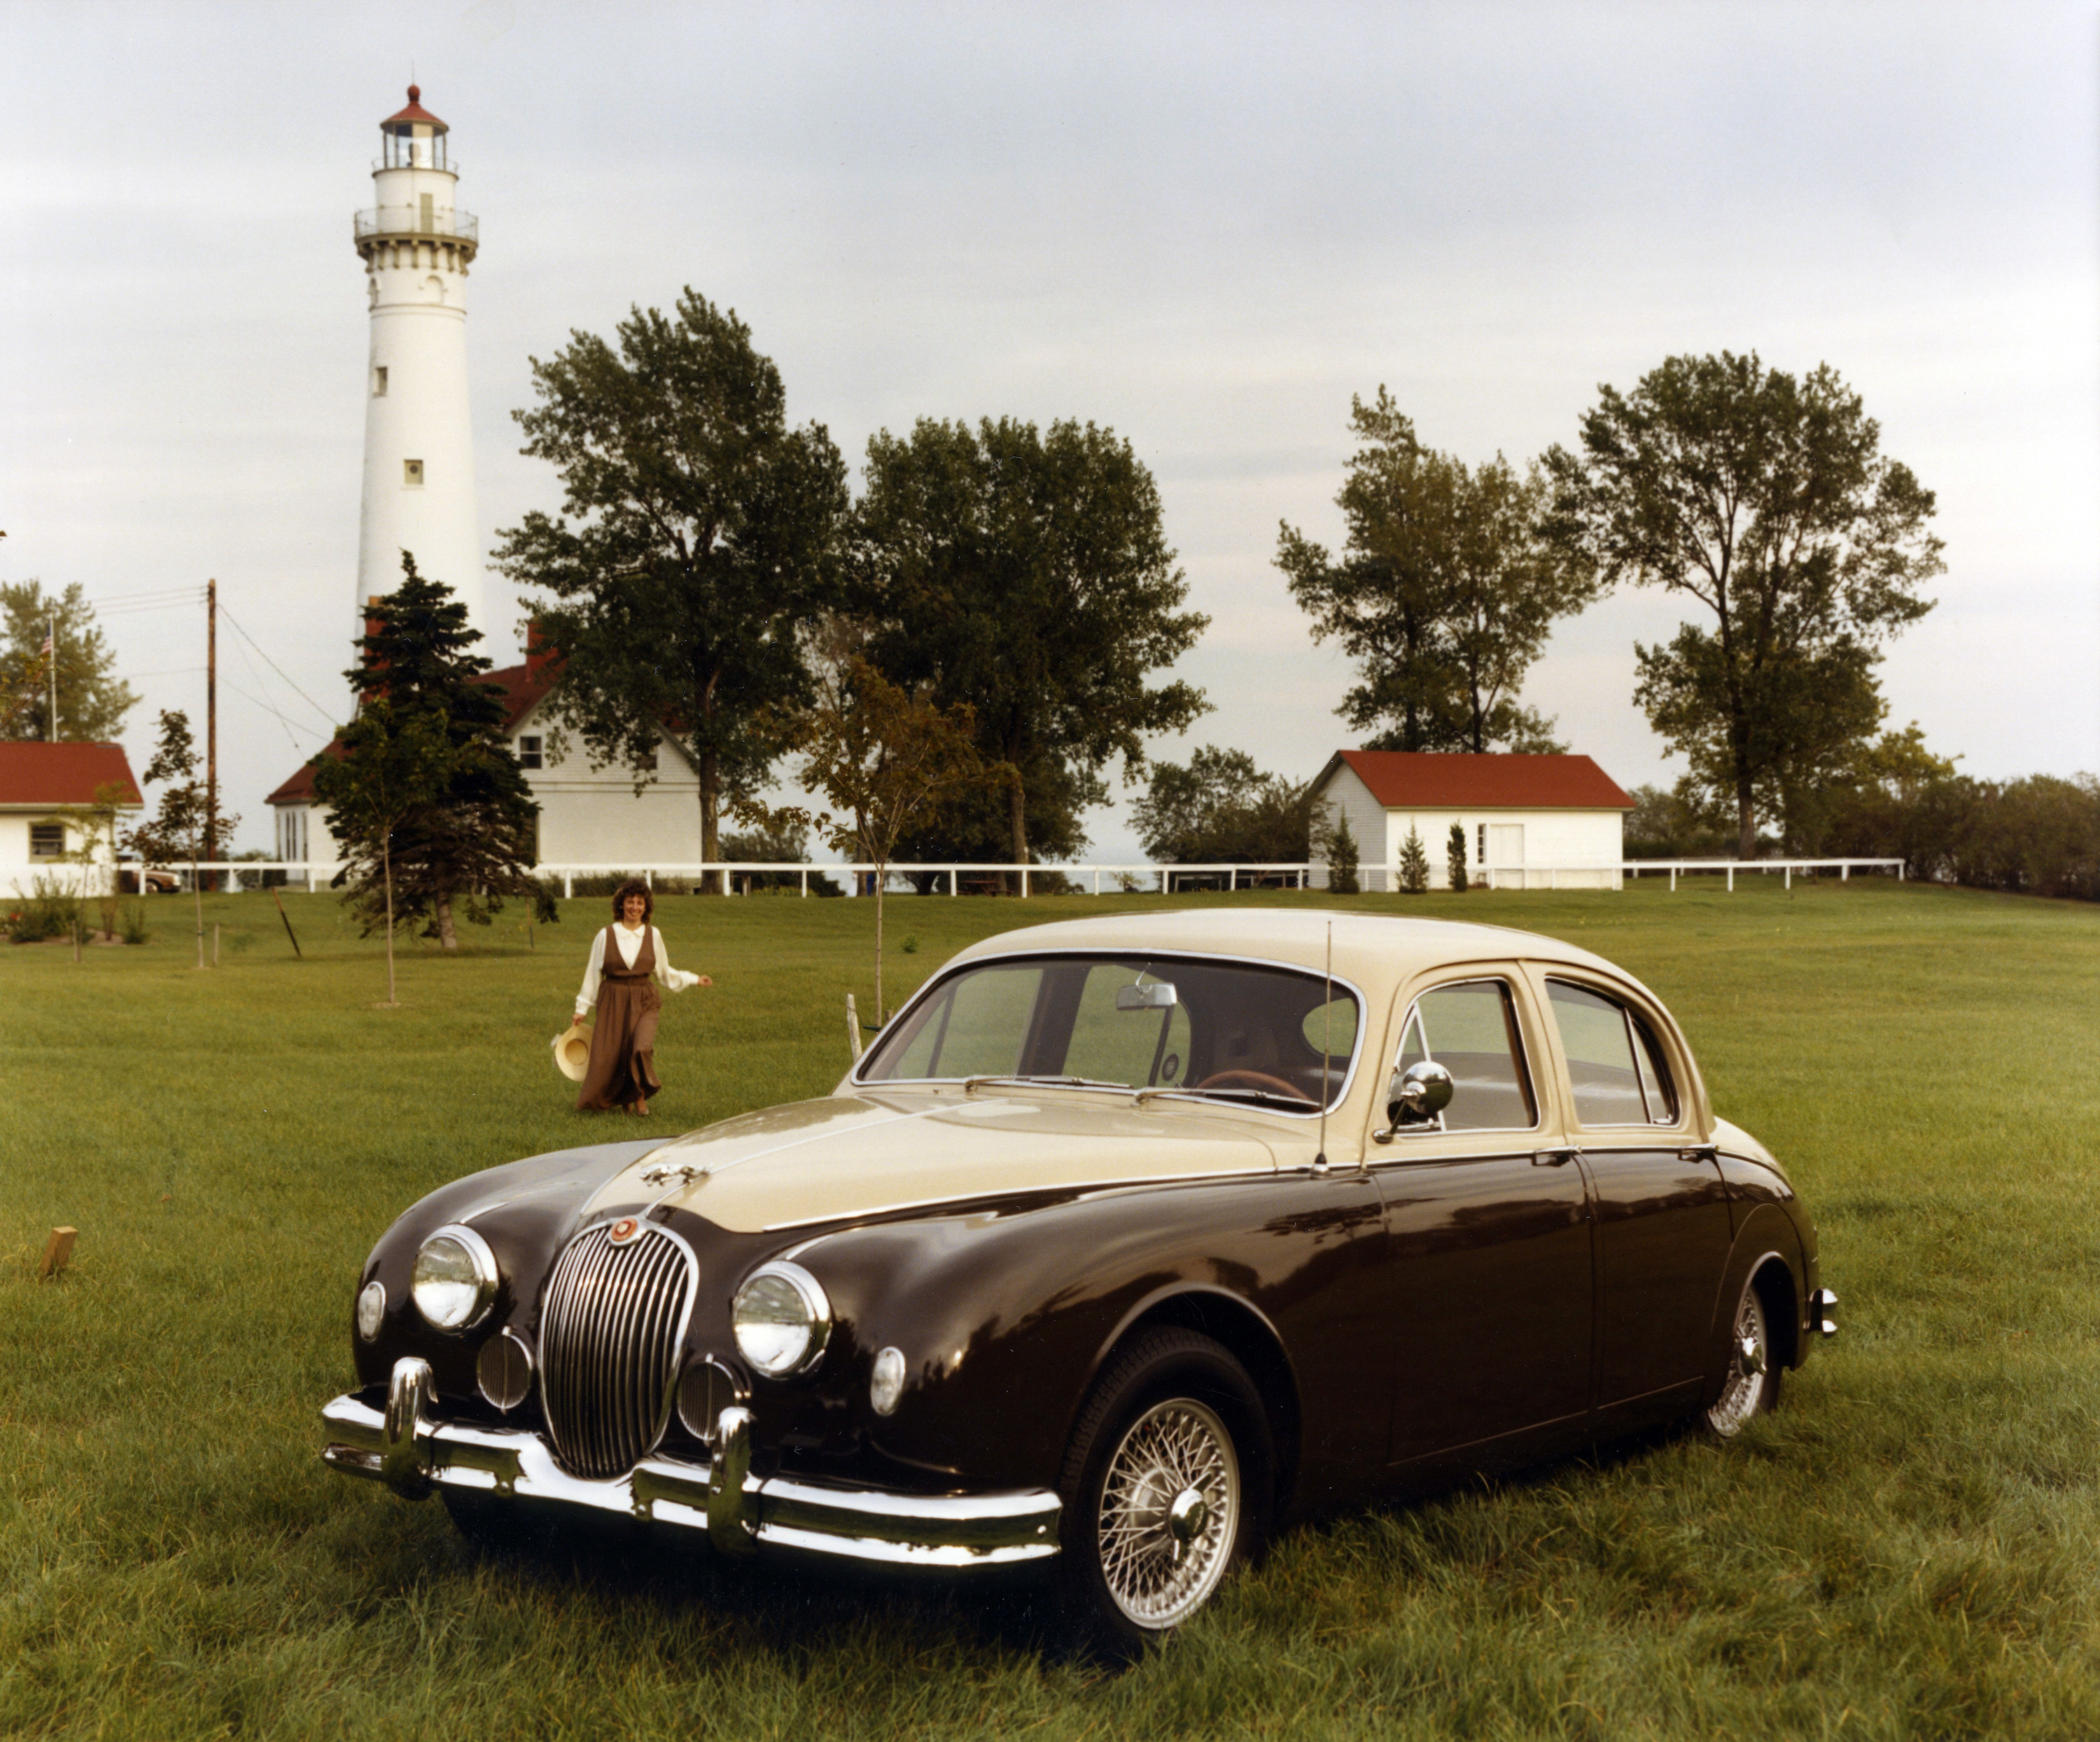 The left-hand drive in this Mark 1 sedan indicates this promotional photo was clearly made for the US market, possibly shot in Maine or Long Island. All images courtesy of Jaguar Land Rover North American Archives.